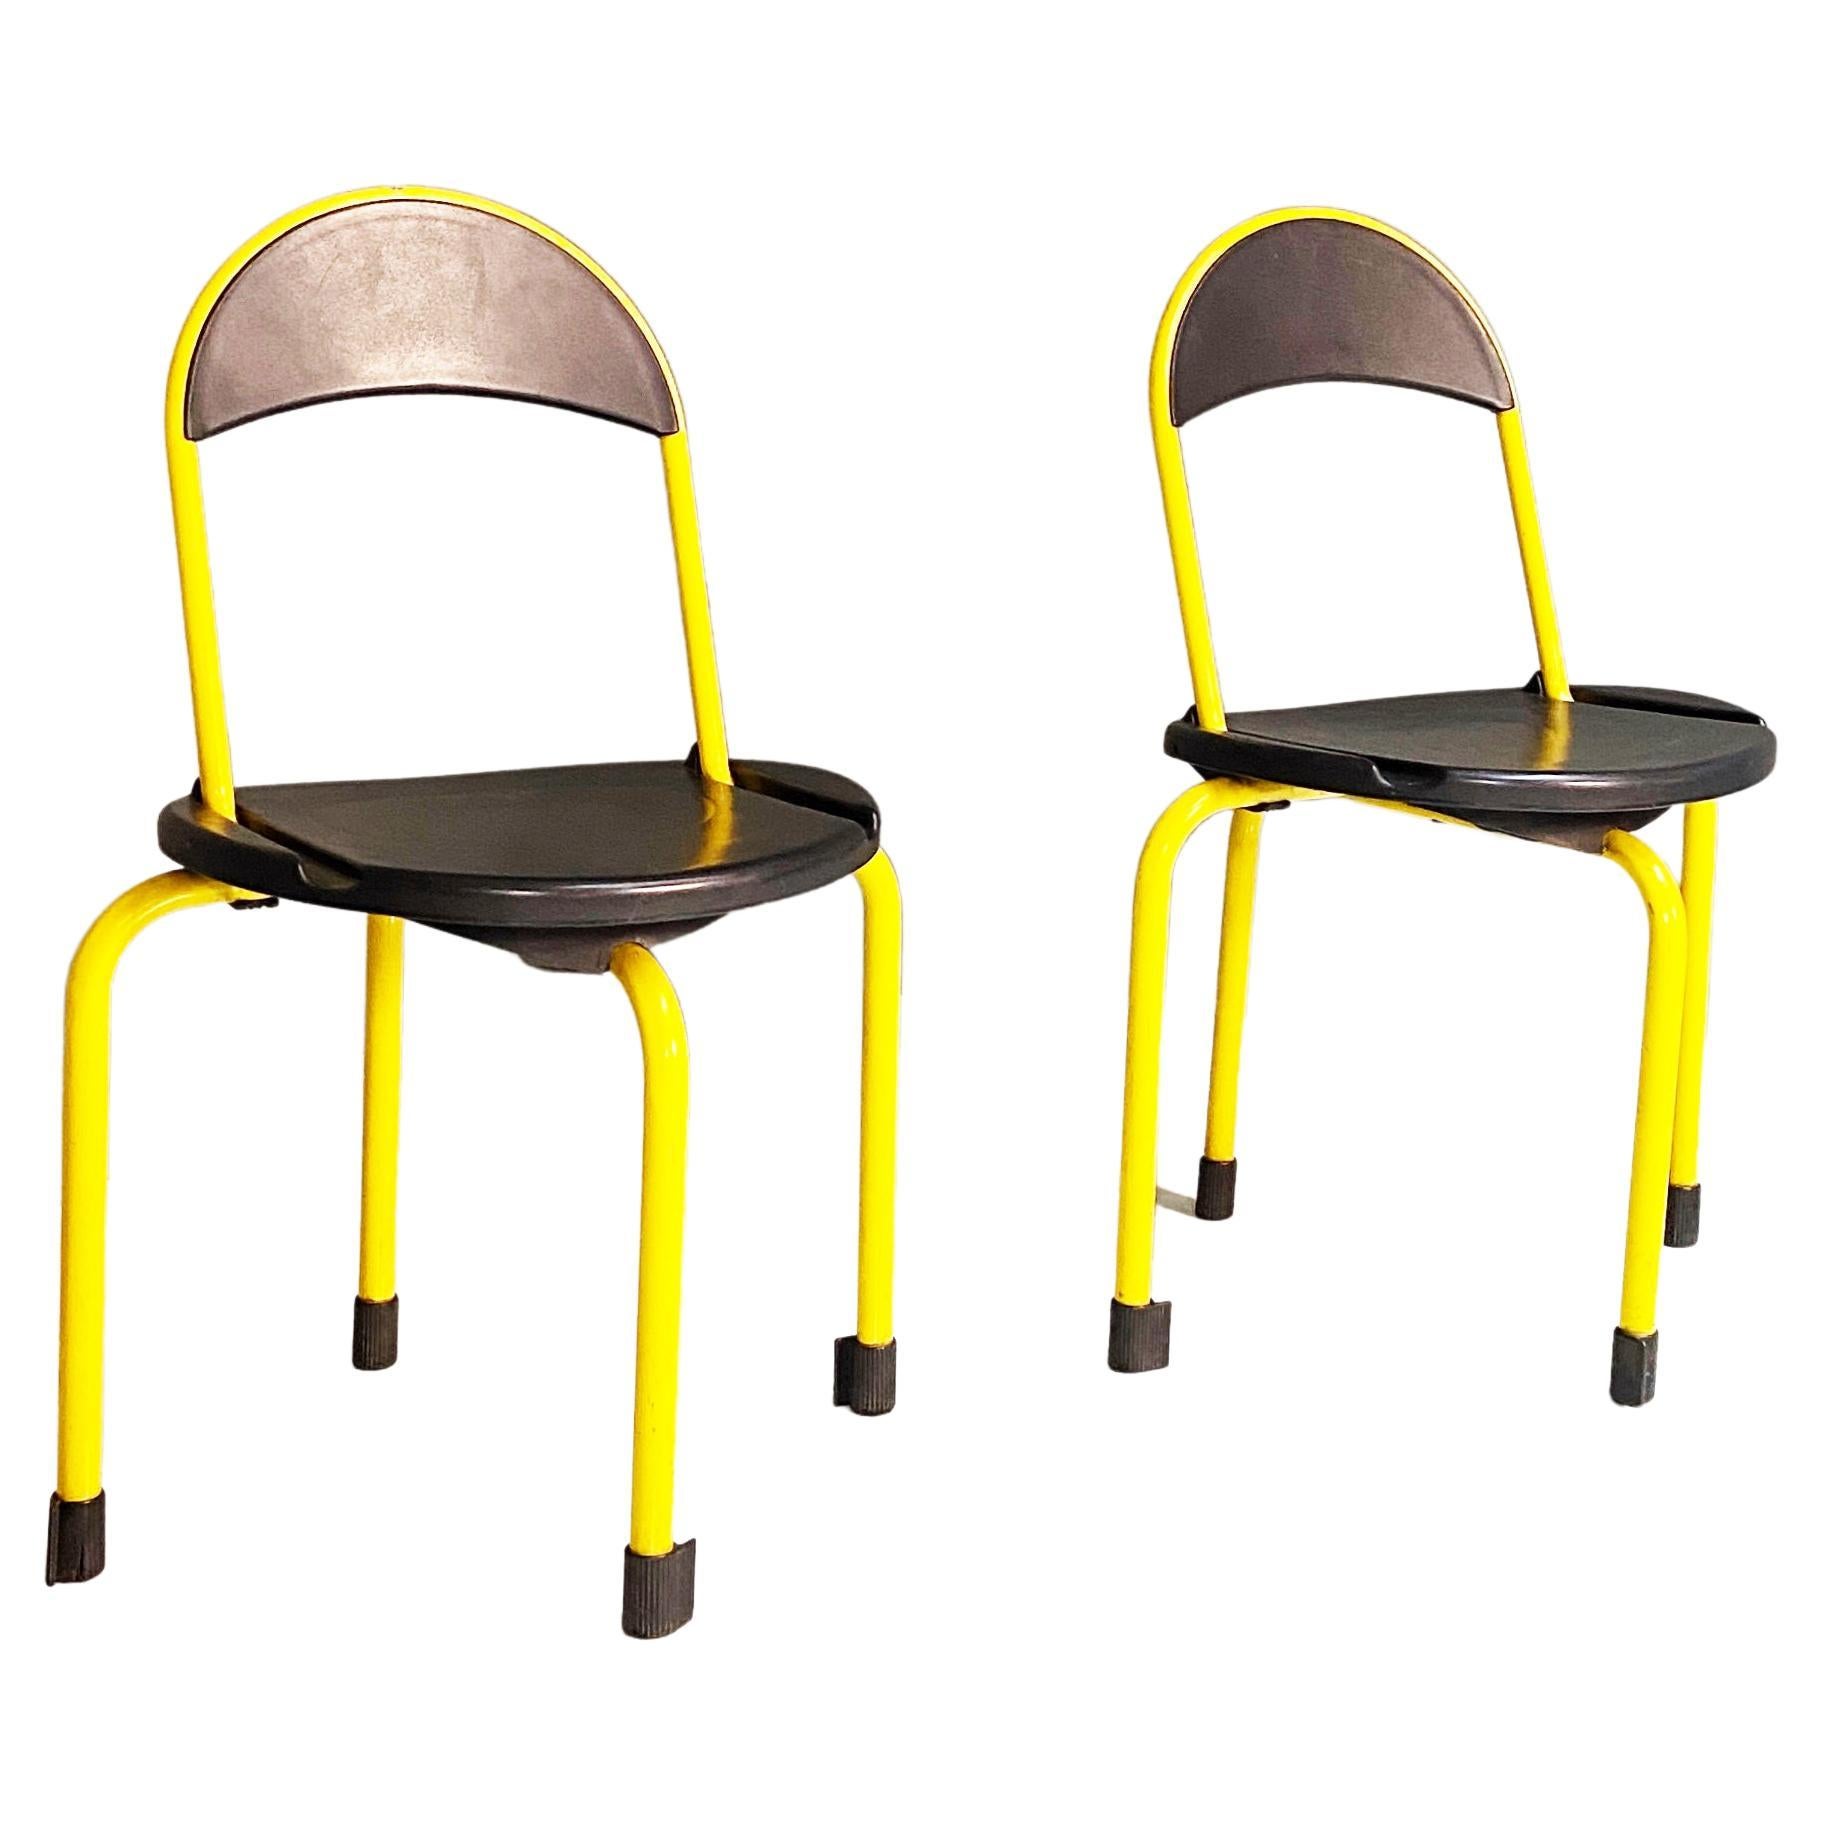 Modern folding plastic and metal seats by Lamm, 1980s For Sale